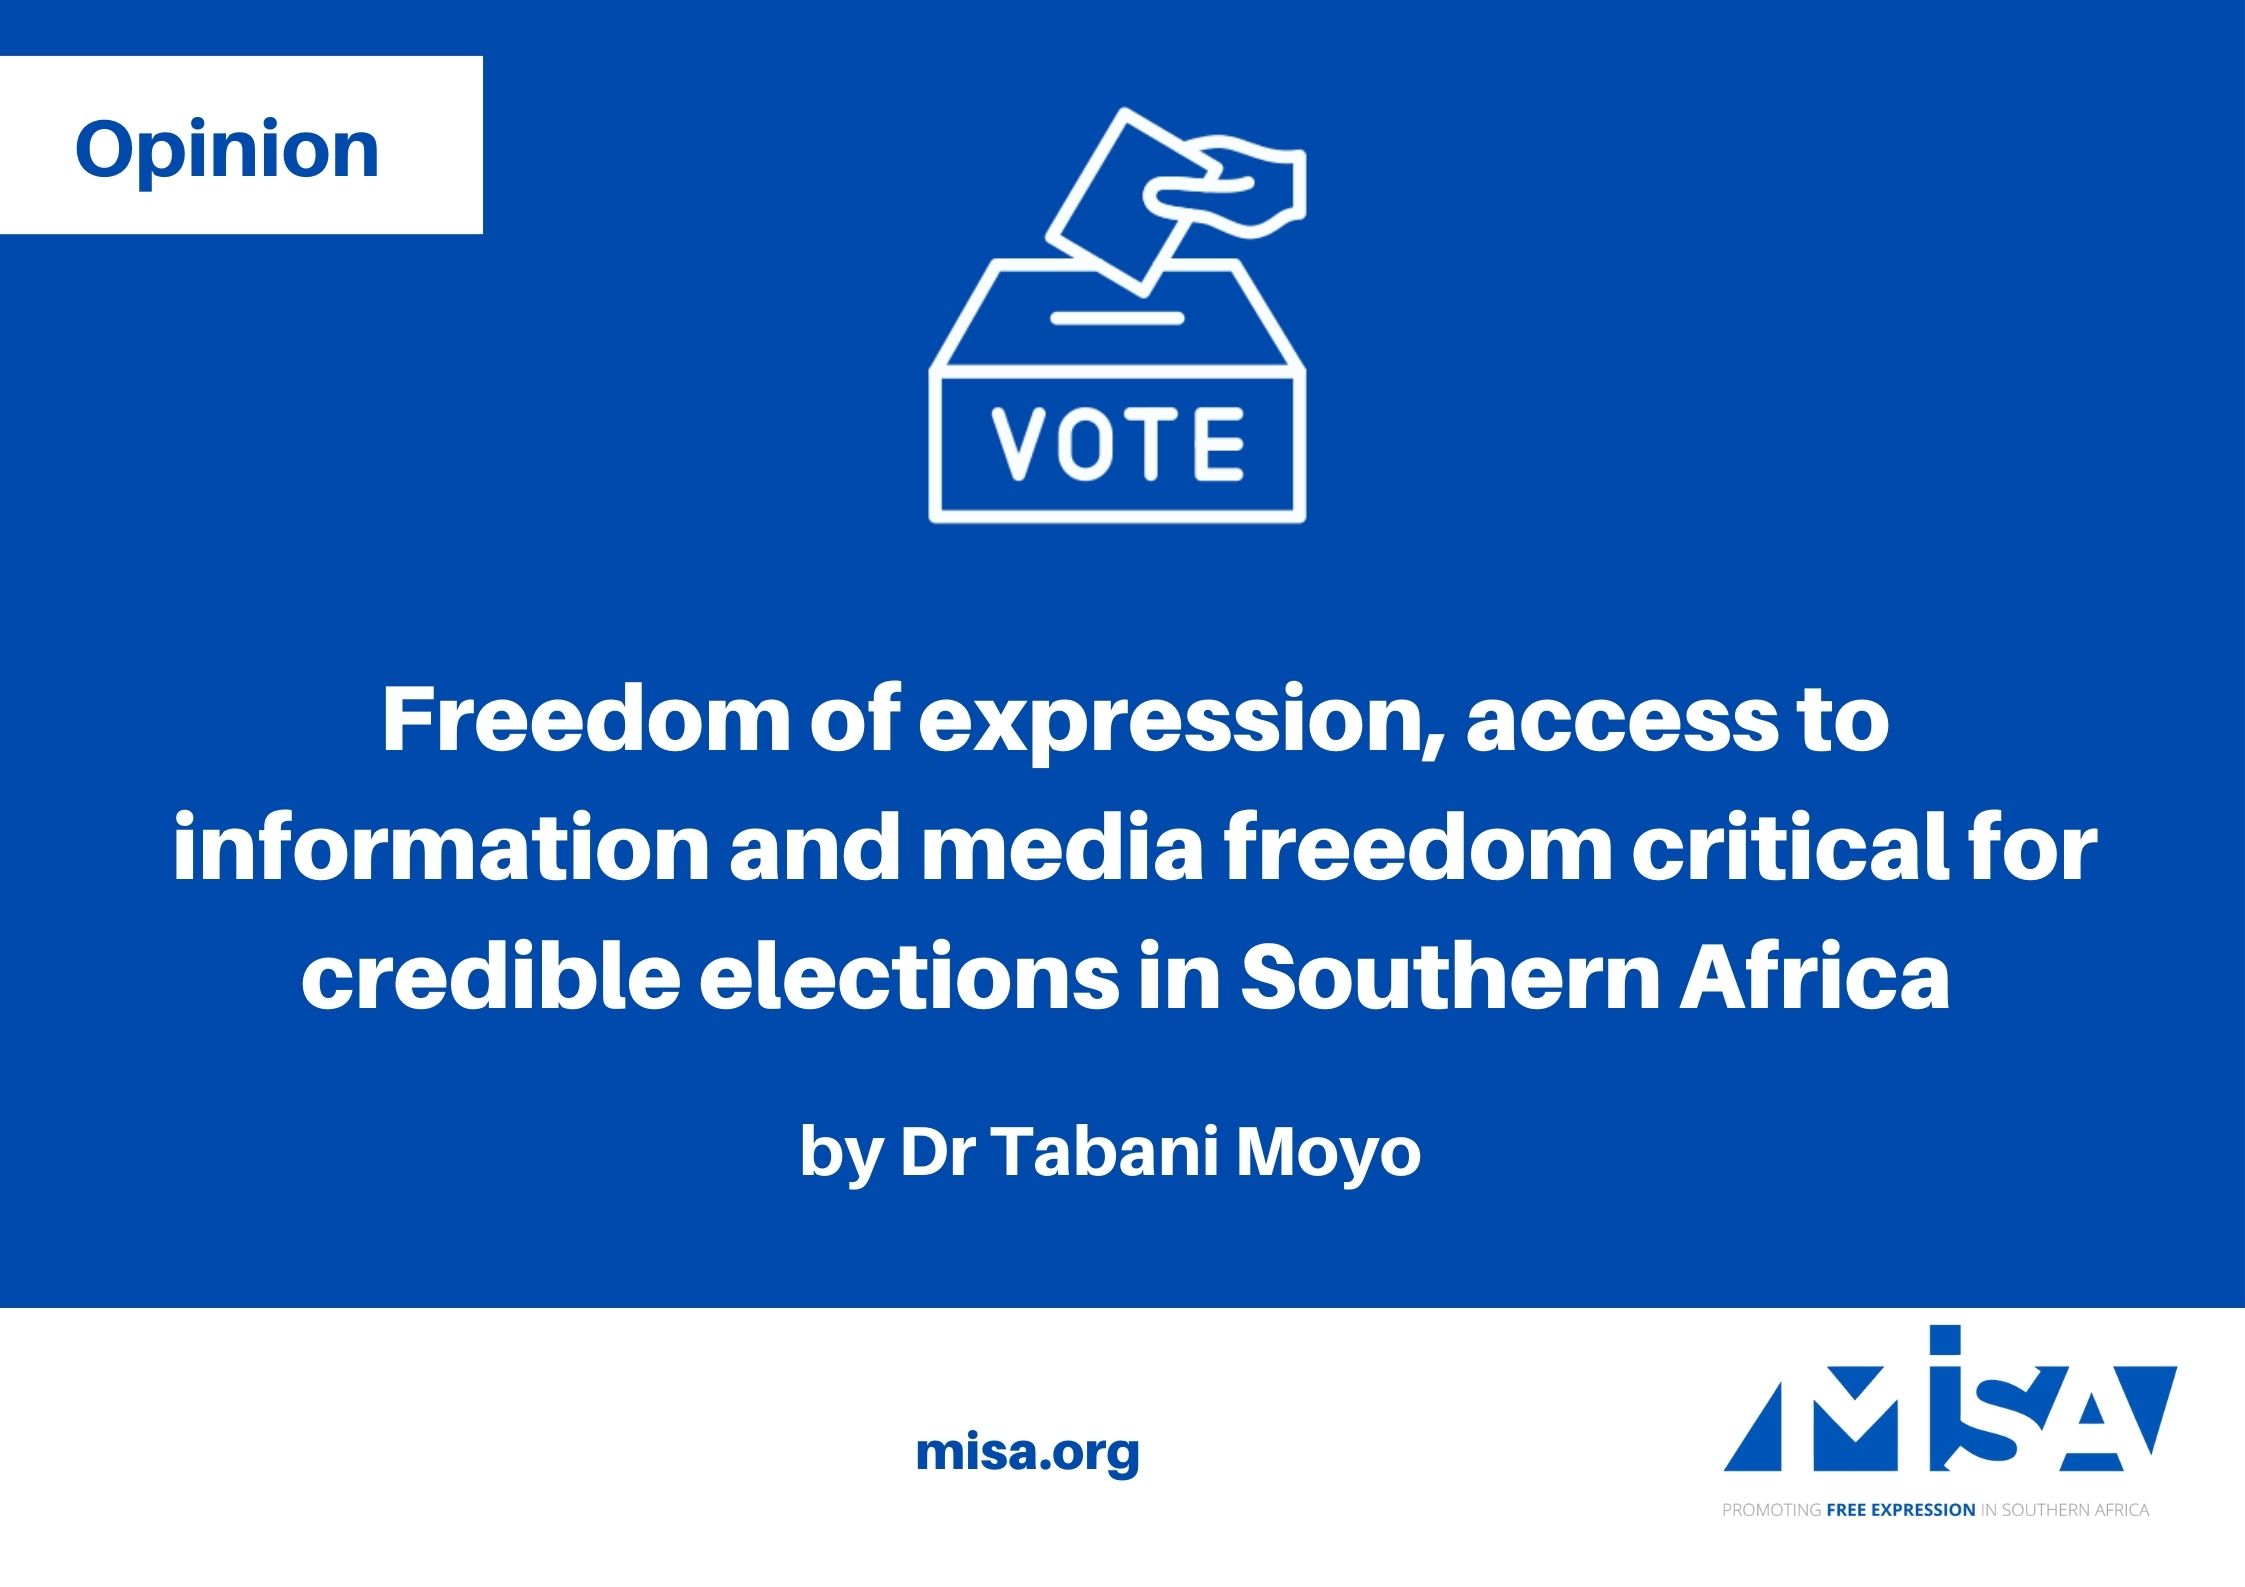 Freedom of expression, access to information and media freedom critical for credible elections in Southern Africa